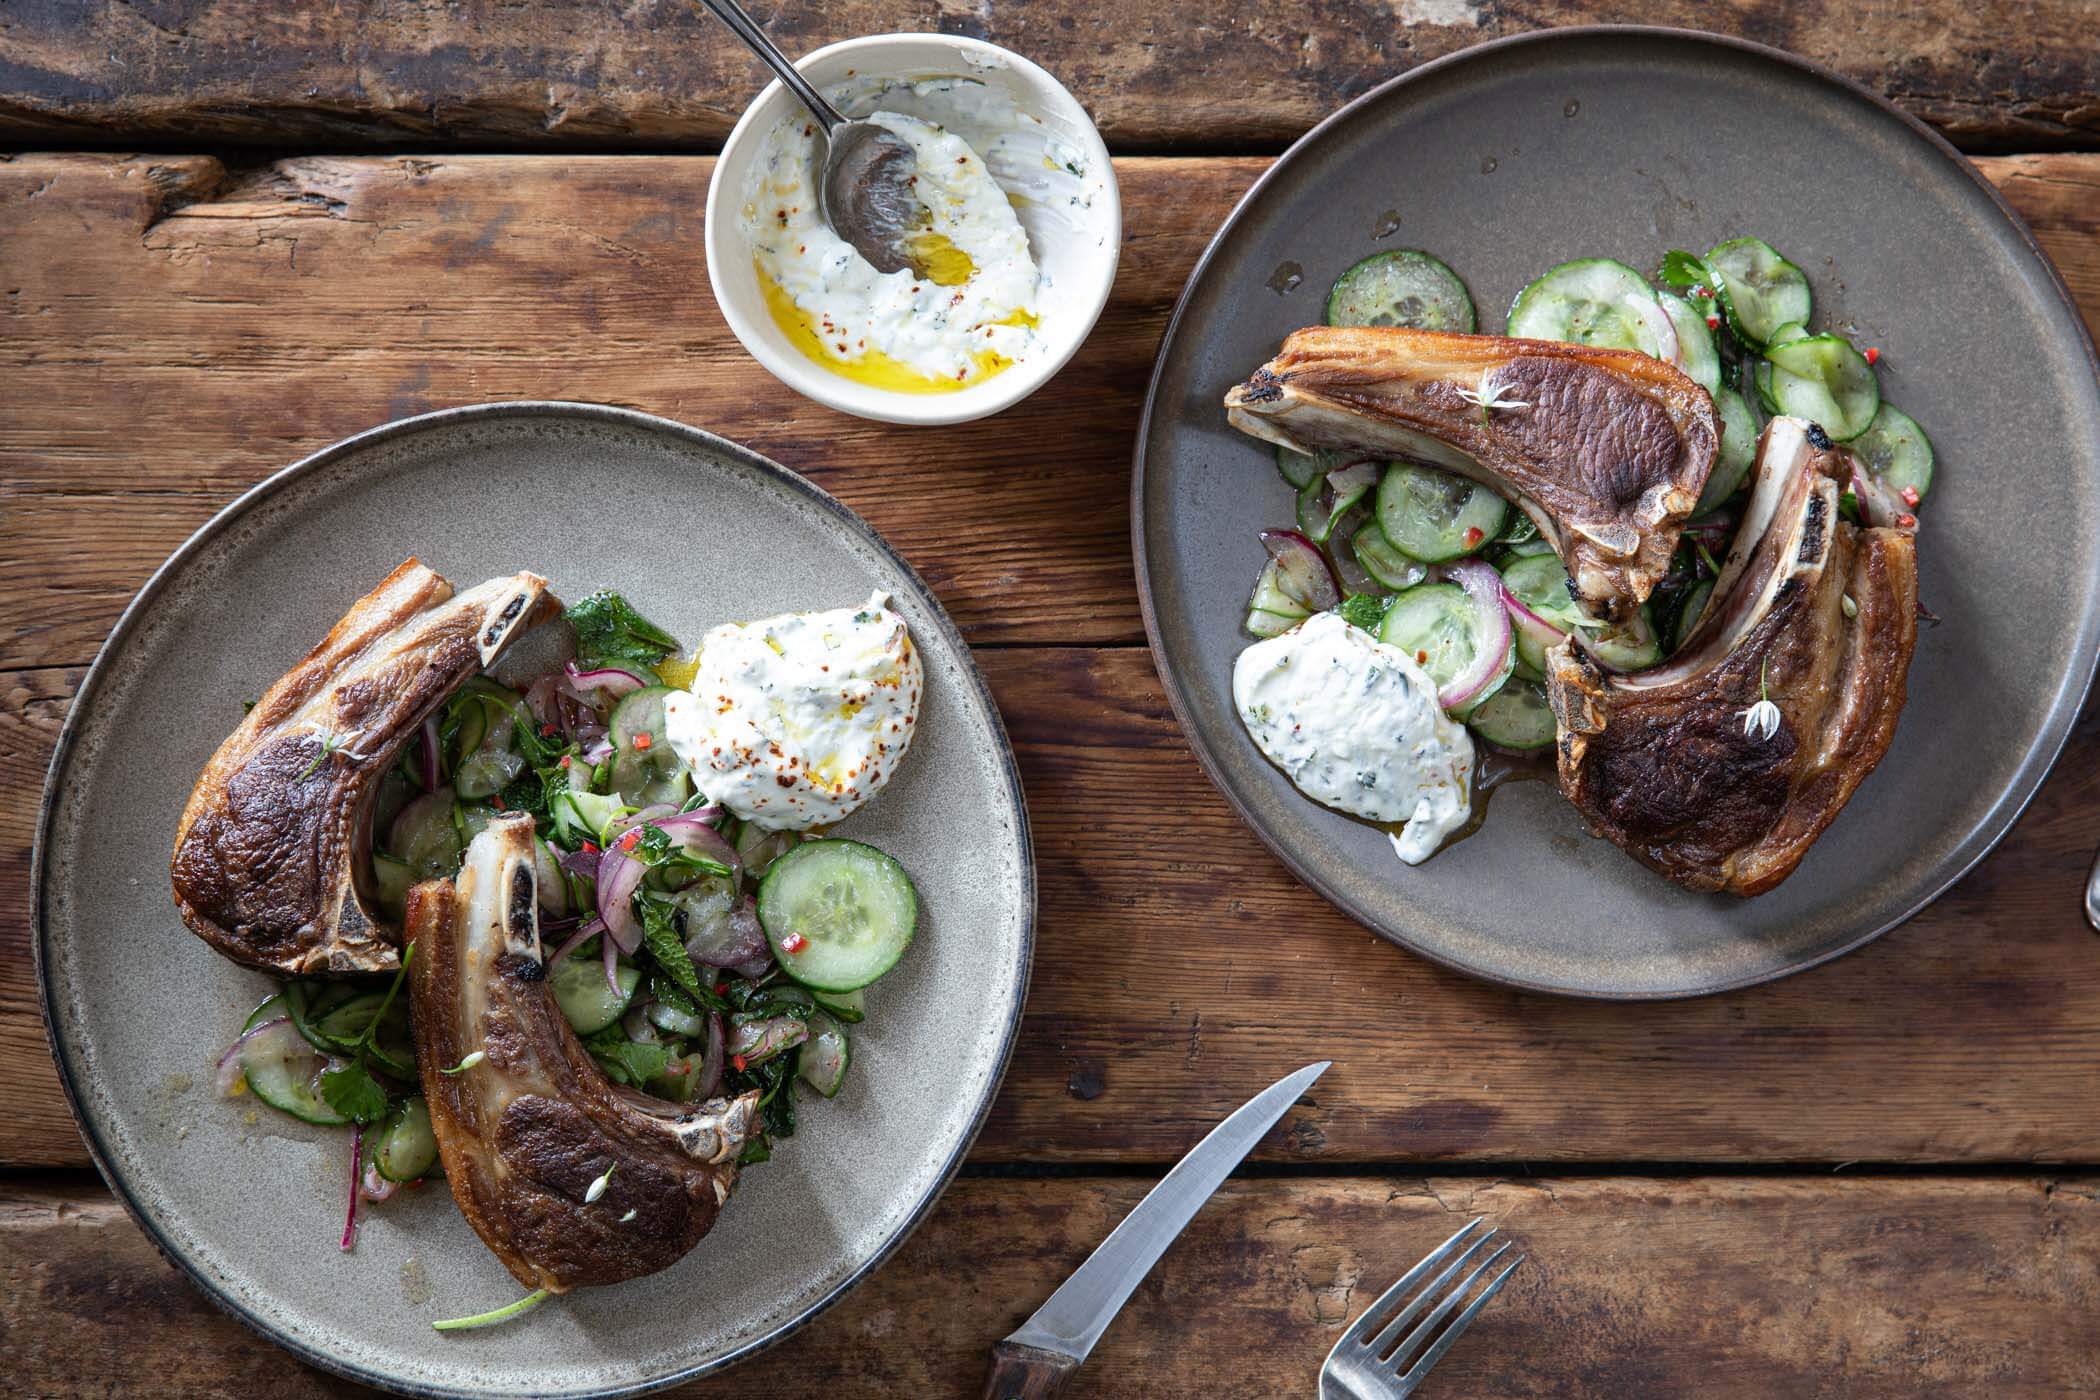 Lamb chops with cucumber salad and minted yoghurt.